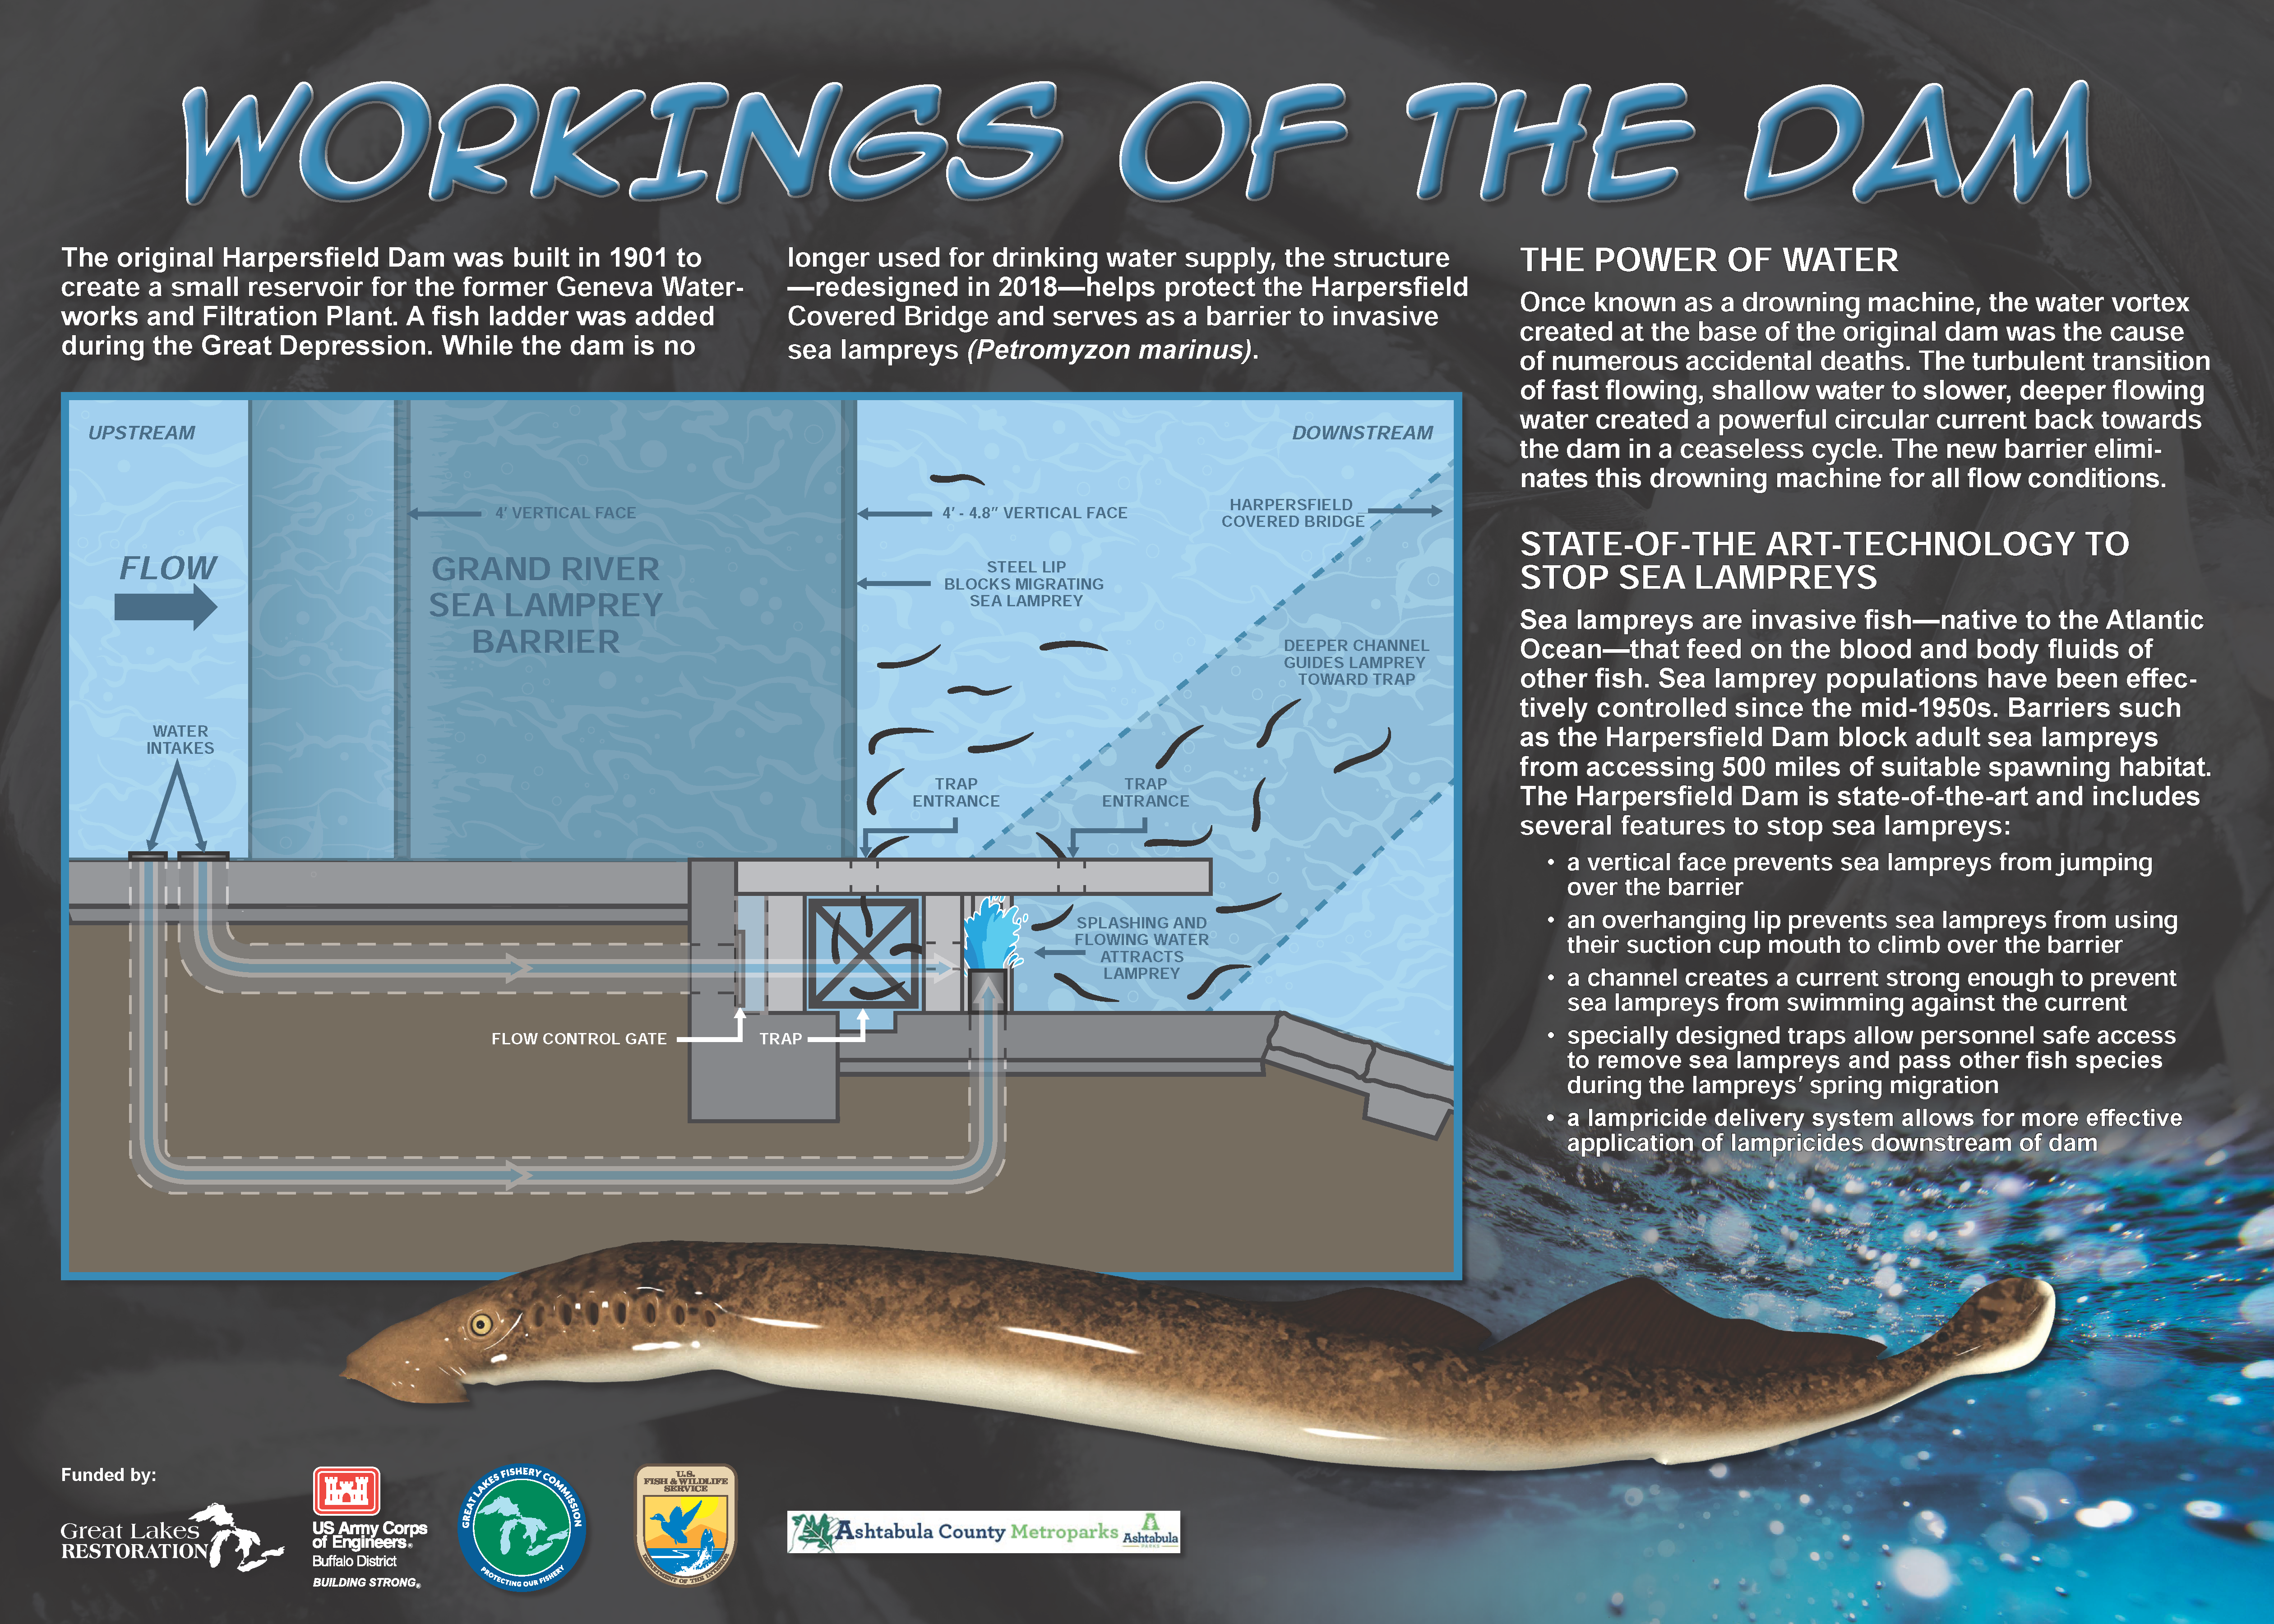 A photo of a sign with a sea lamprey and dam schematic